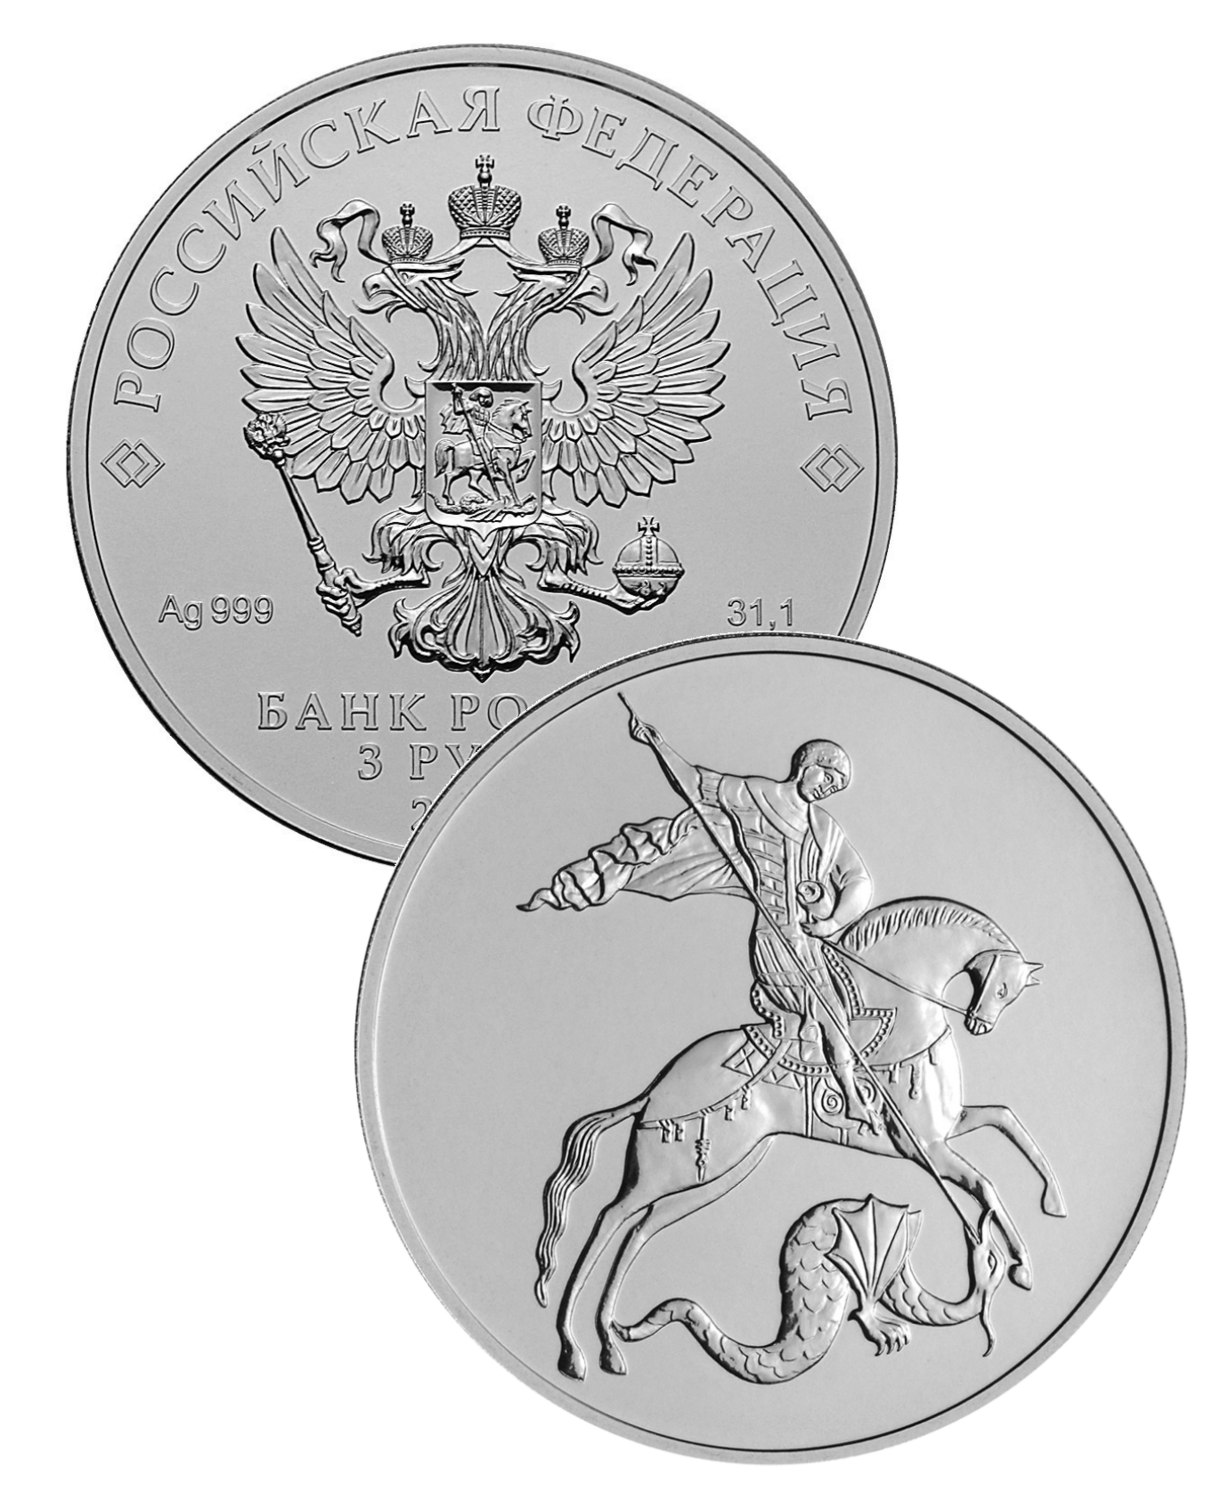 Russia. 2020. 3 Rubles. MMD. George the Victorious. Silver 999. 1.0 Oz ASW 31.5 g. UNC Mintage: <300,000